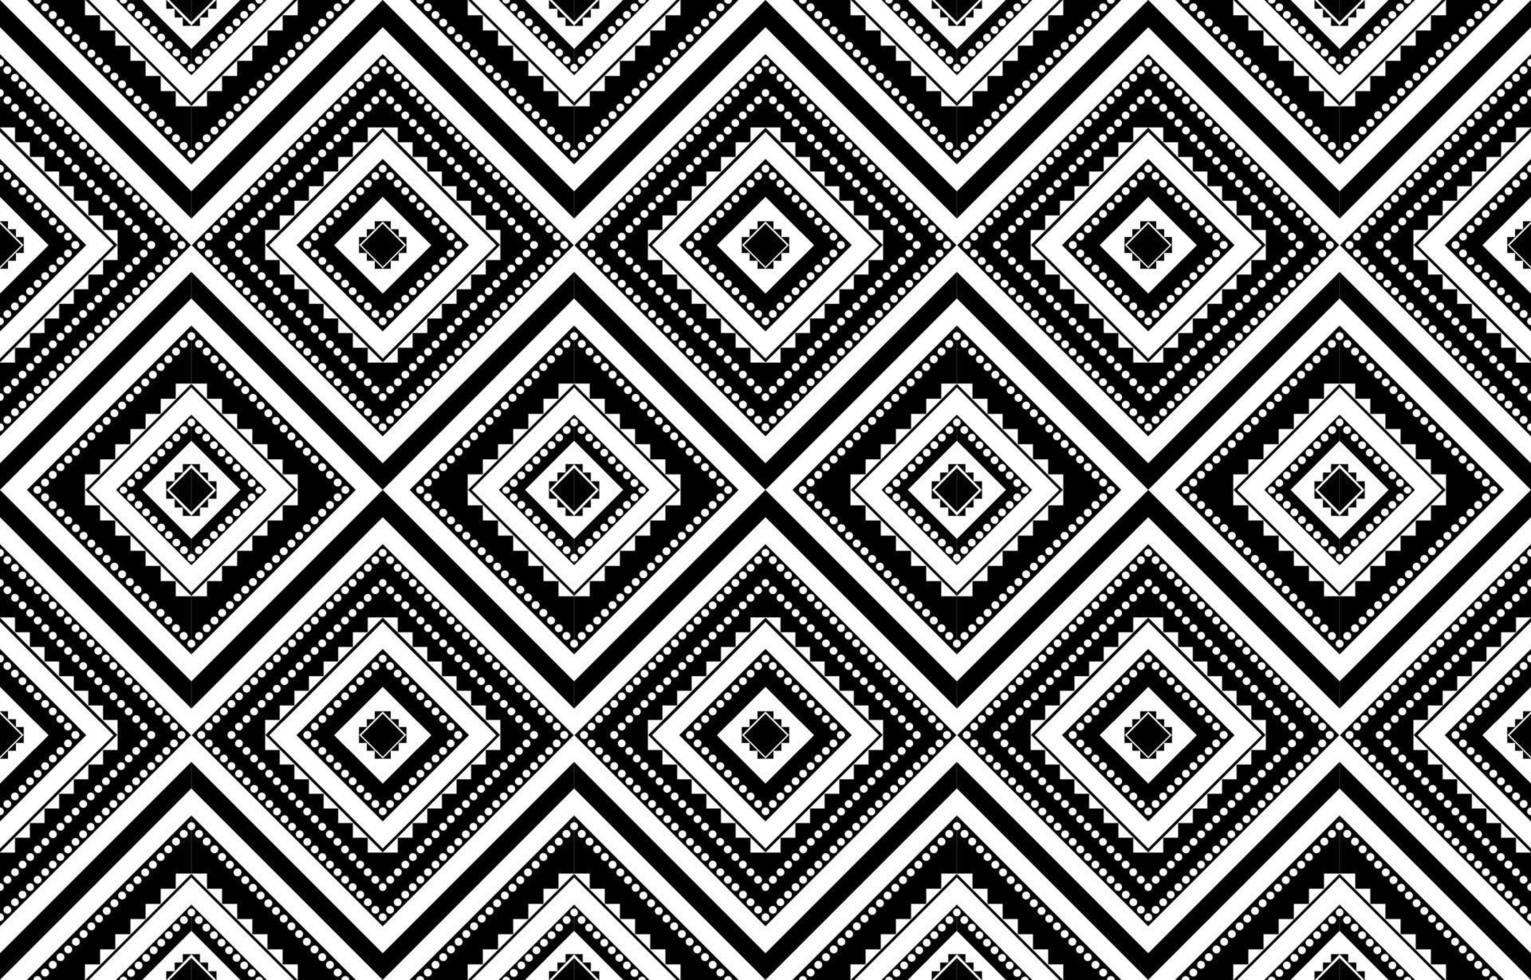 Geometric ethnic seamless pattern. Tribal style. Design for background, illustration, texture, fabric, wallpaper, batik, carpet, embroidery, clothing vector